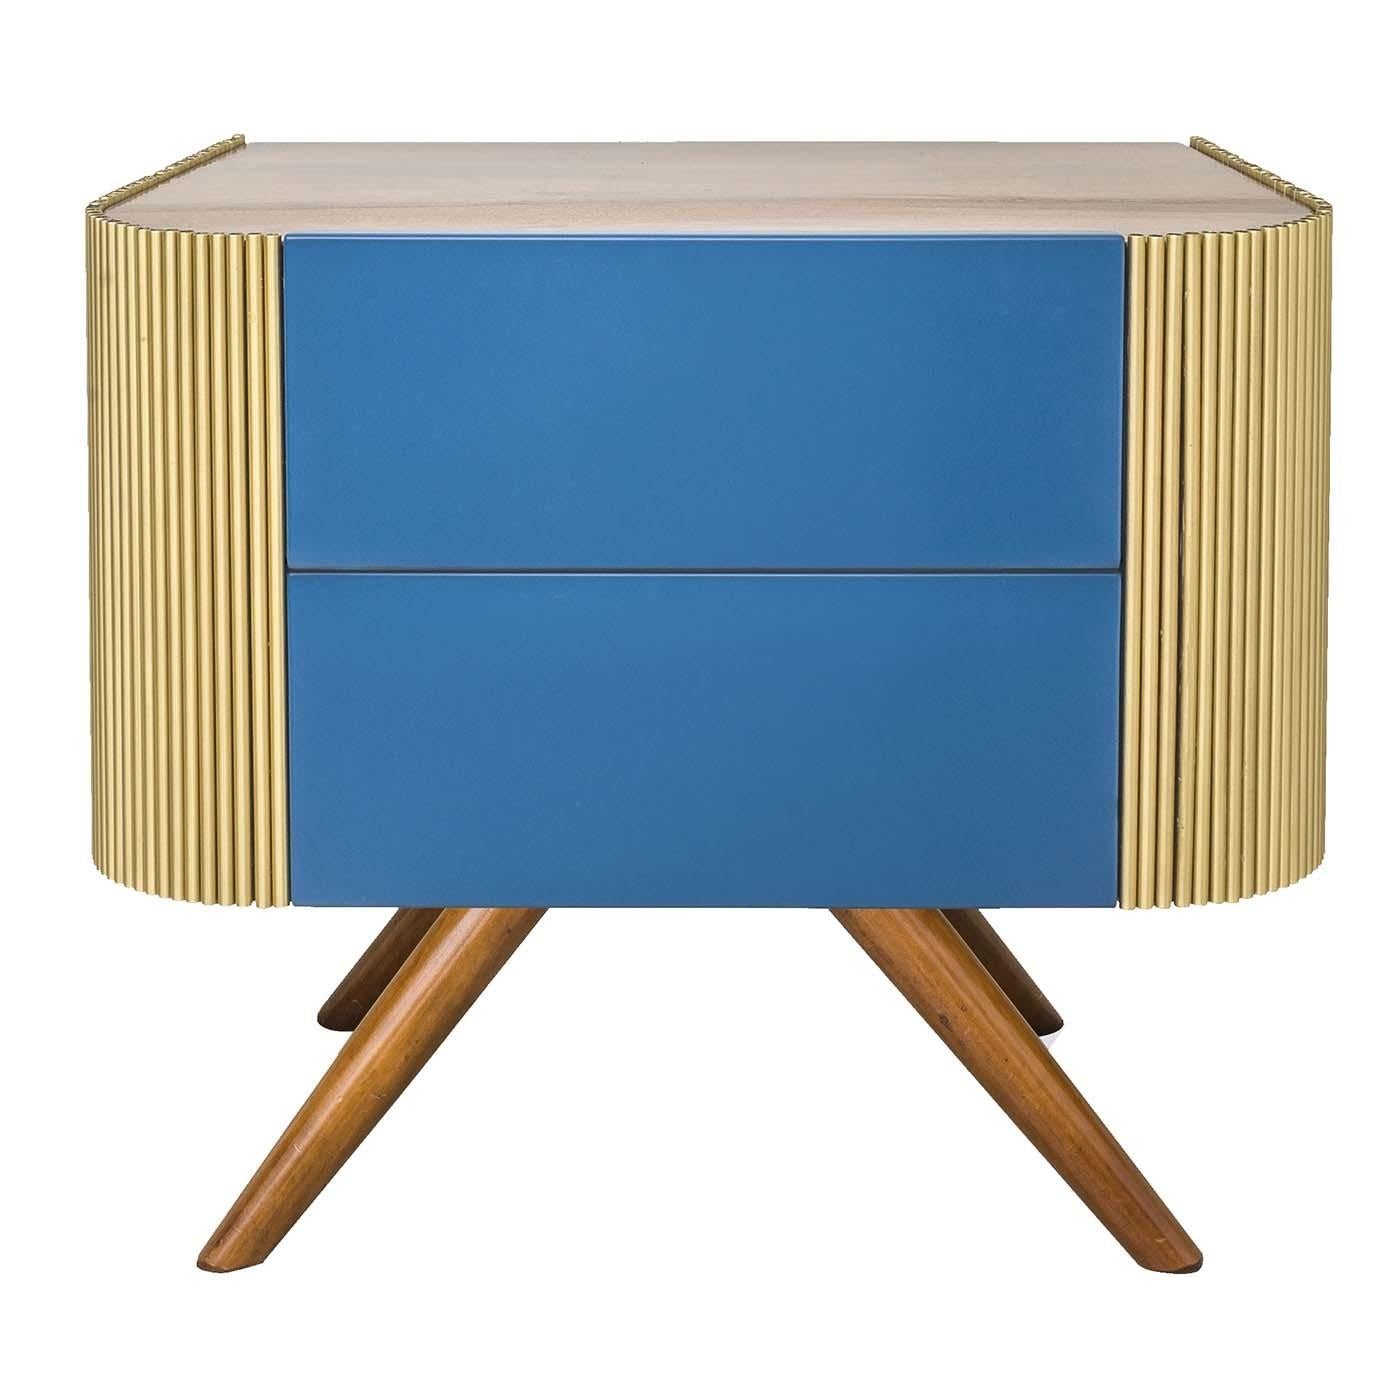 This nightstand with a bit of a retro feel will be sure to liven up any bedroom space. This piece has a walnut wood structure and boasts two bright blue drawers to tuck away objects. Contrasting beveled sides covered in thin brass rods and dark